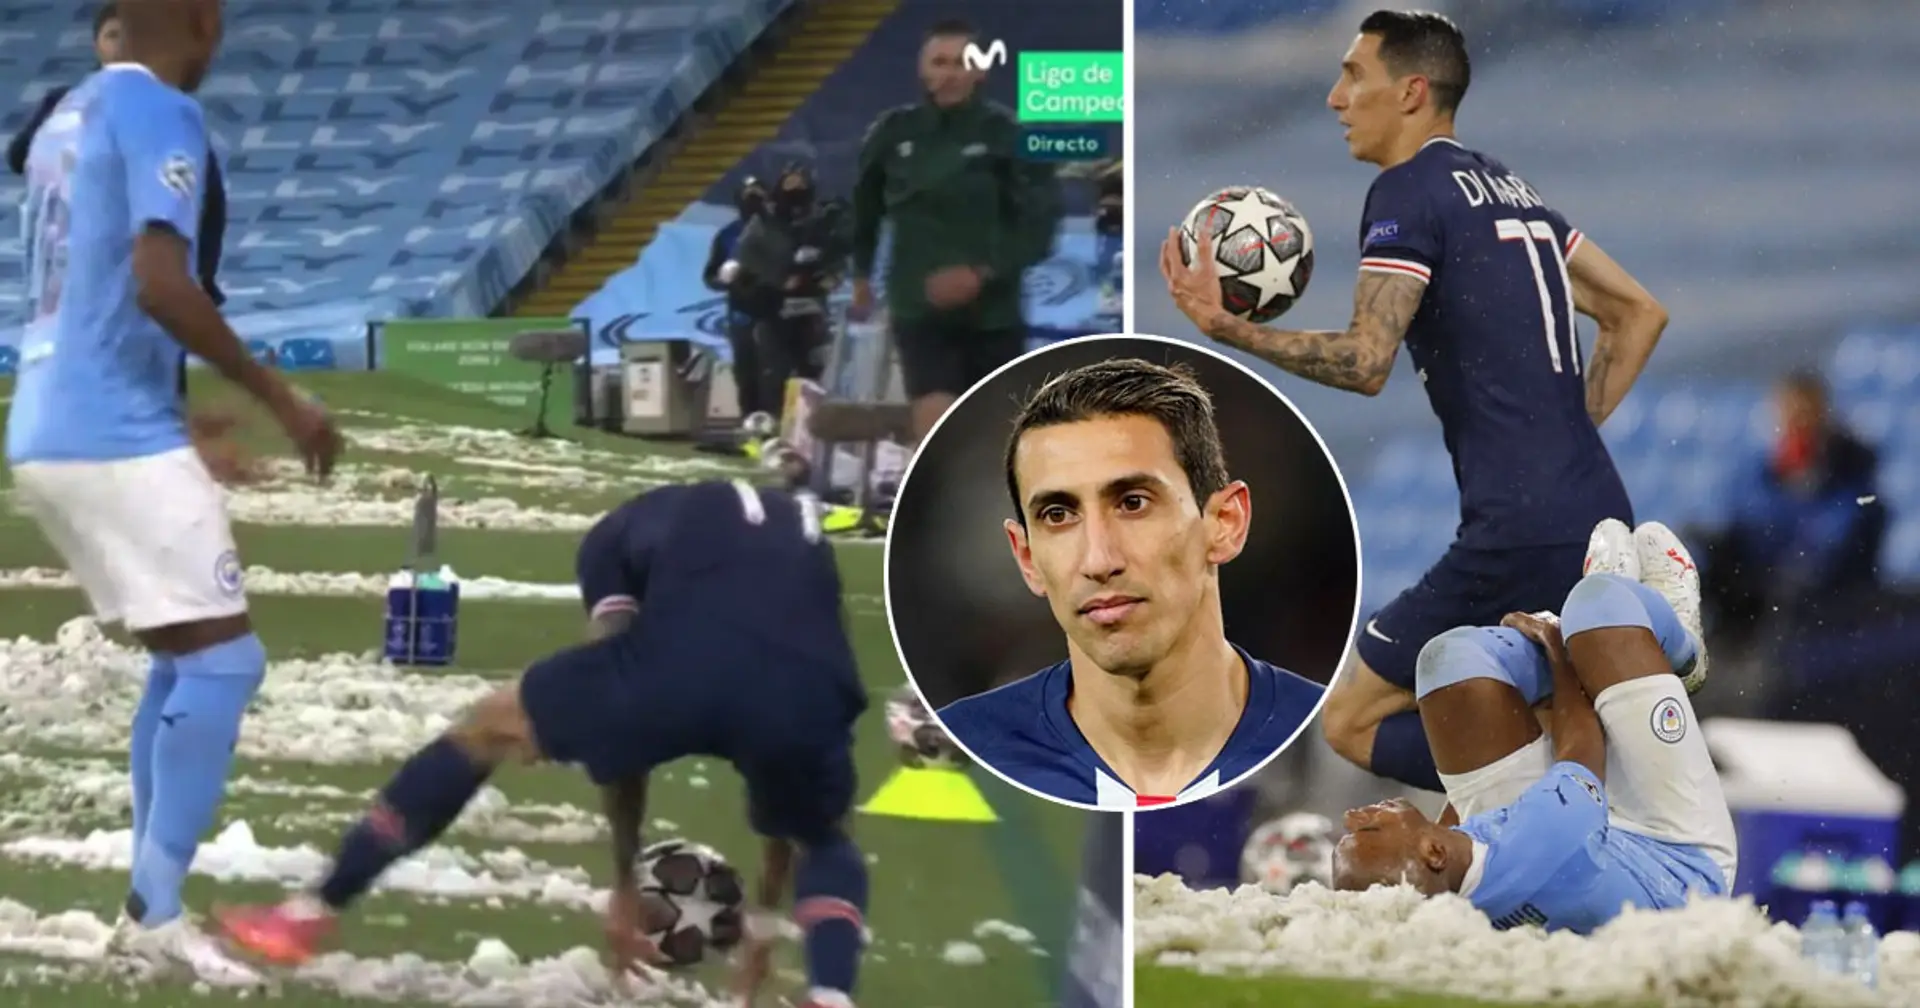 Di Maria suspended for PSG's next 3 UCL games following red card from last season